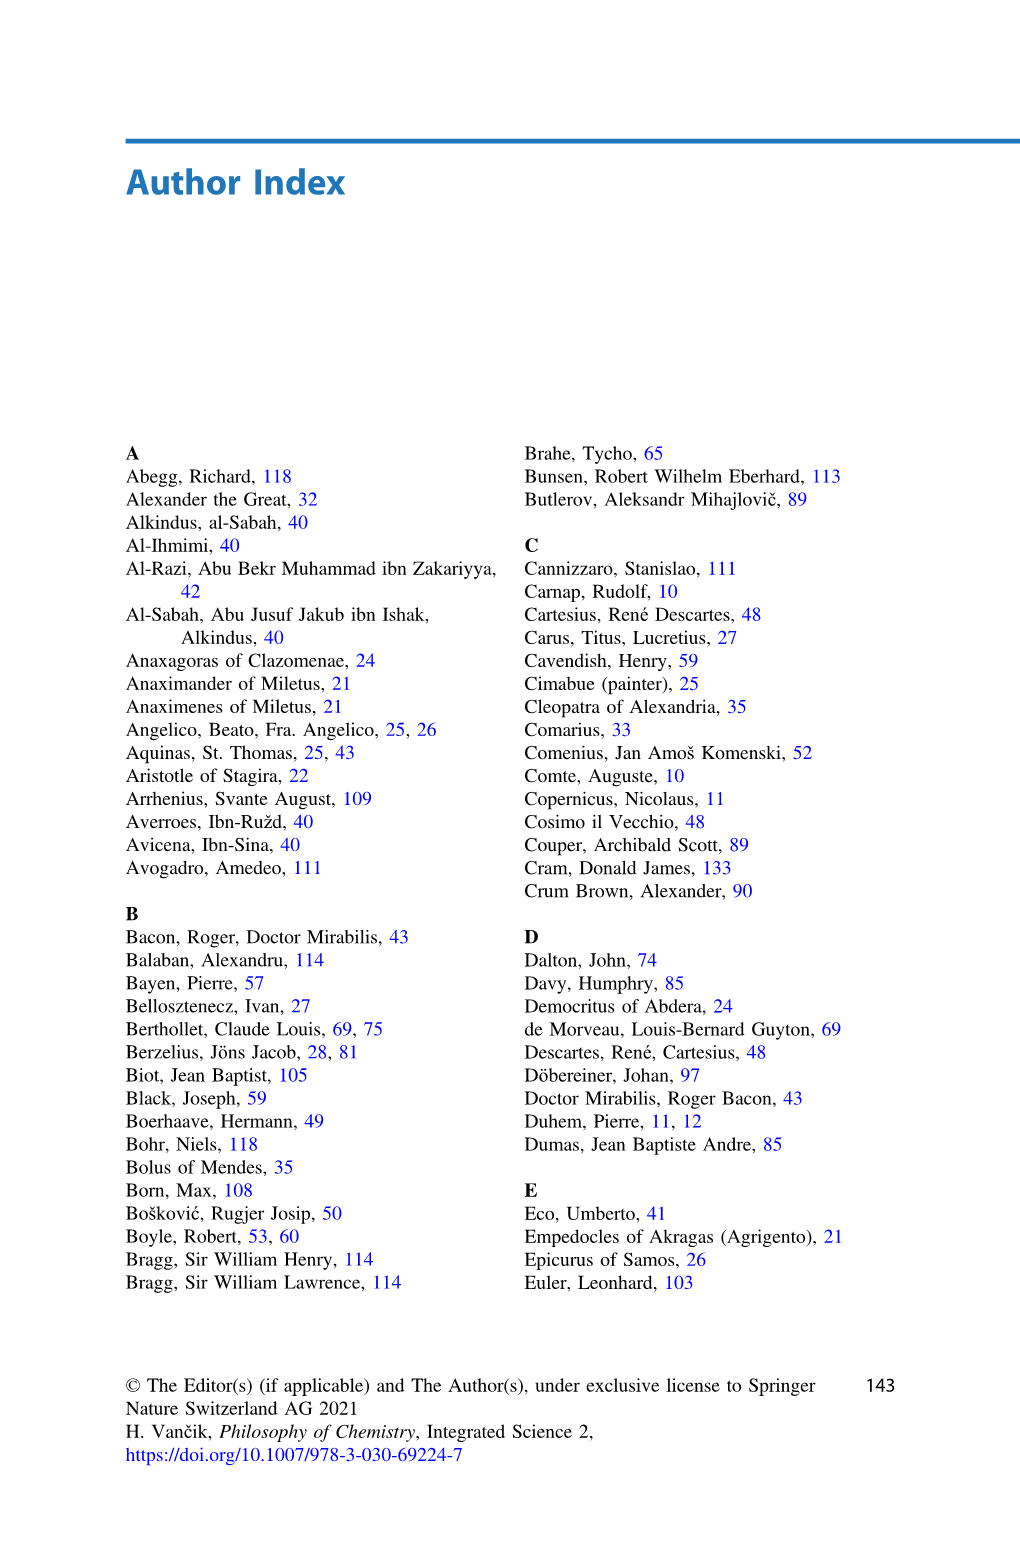 Philosophy of Chemistry, Integrated Science 2, 144 Author Index